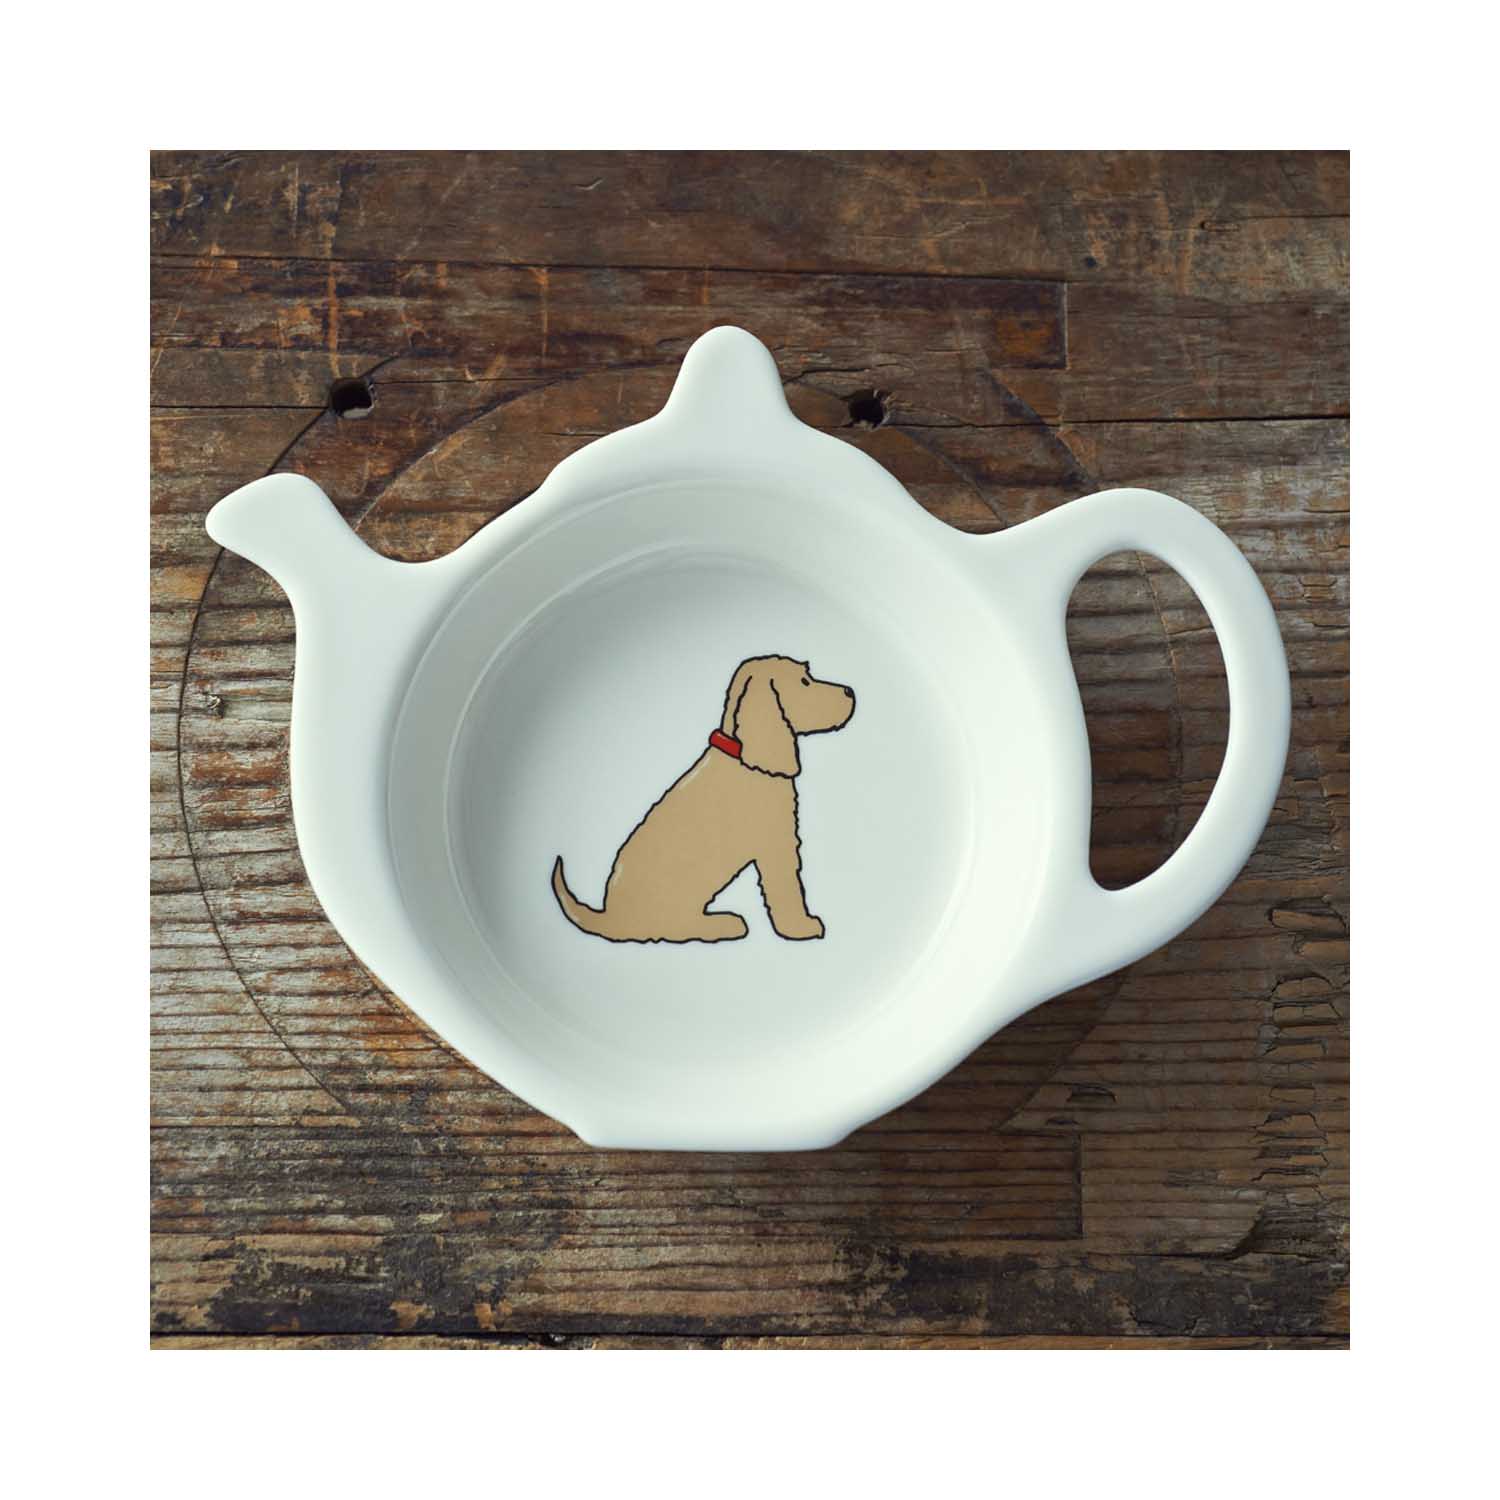 Dog Lover Gifts available at Dog Krazy Gifts - Hetty the Golden Cocker Spaniel Teabag Dish - part of the Sweet William range available from www.DogKrazyGifts.co.uk